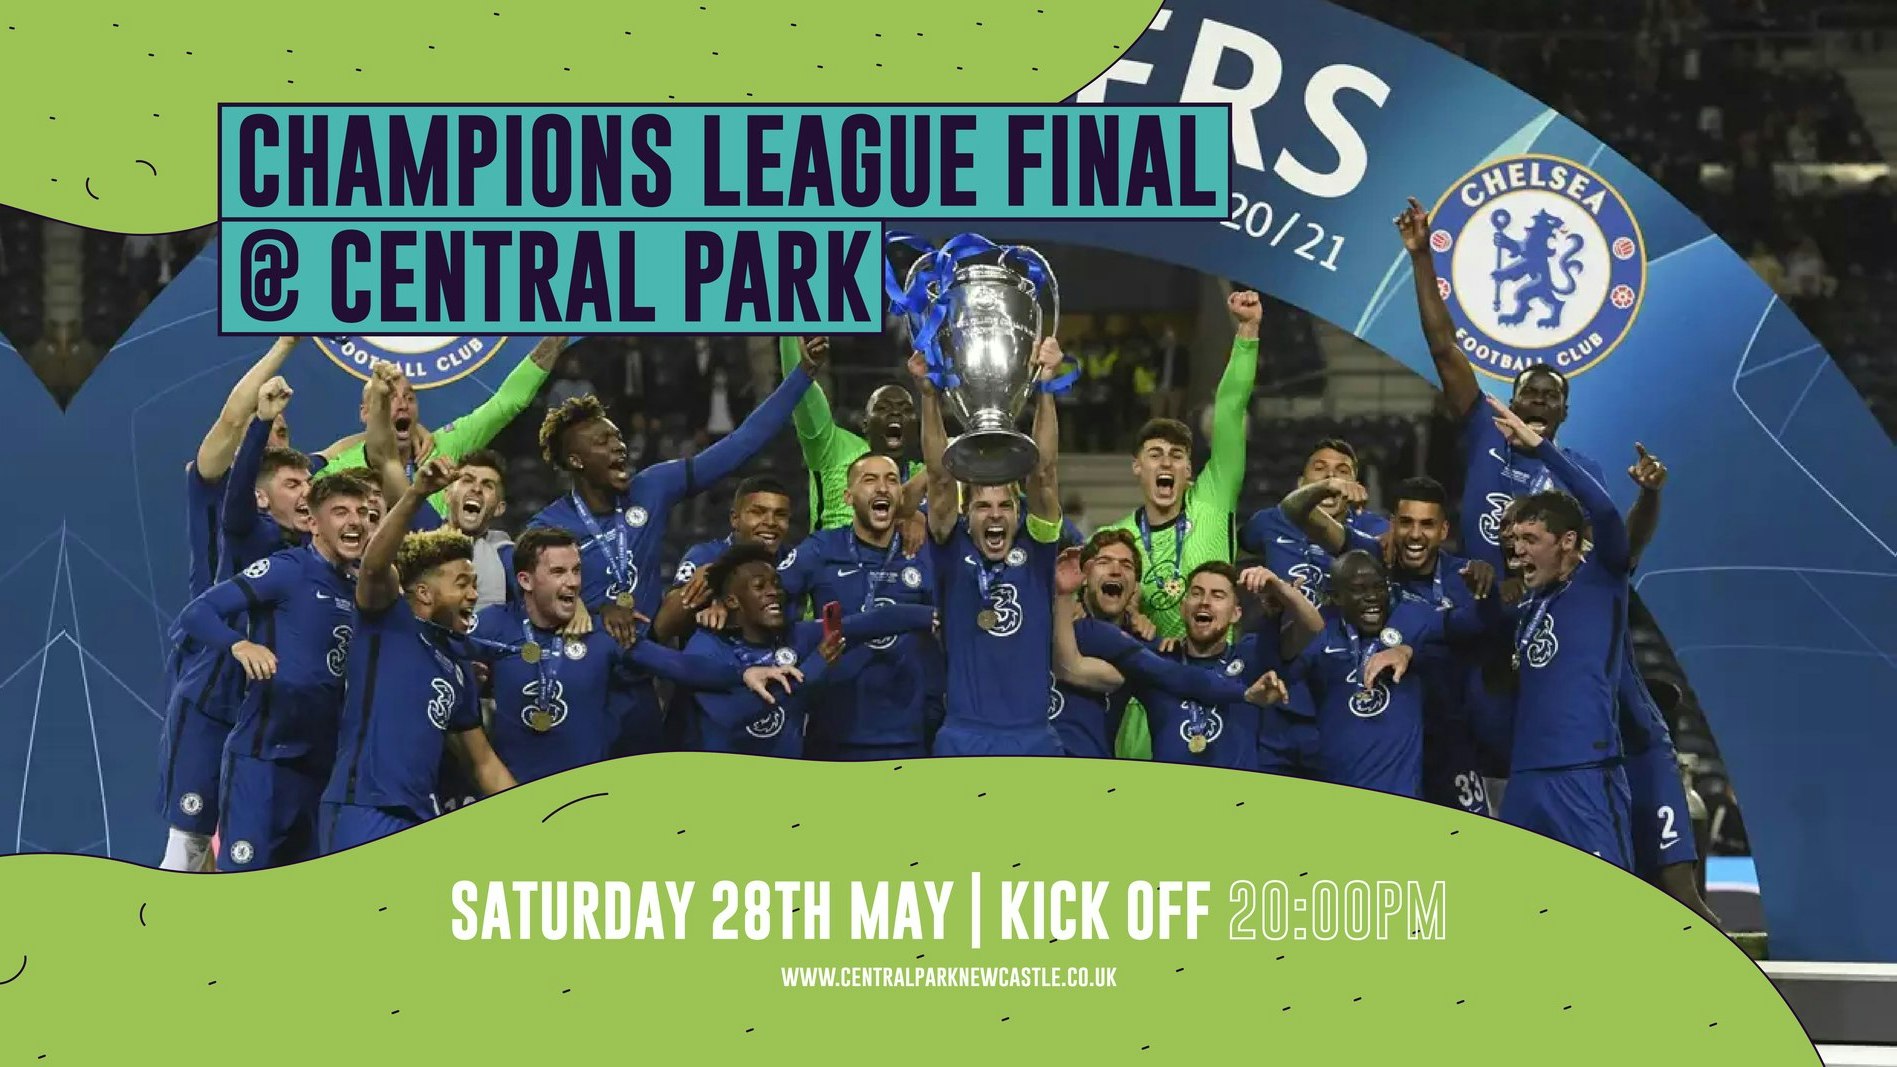 Champion’s League Final – Screened Live at Central Park